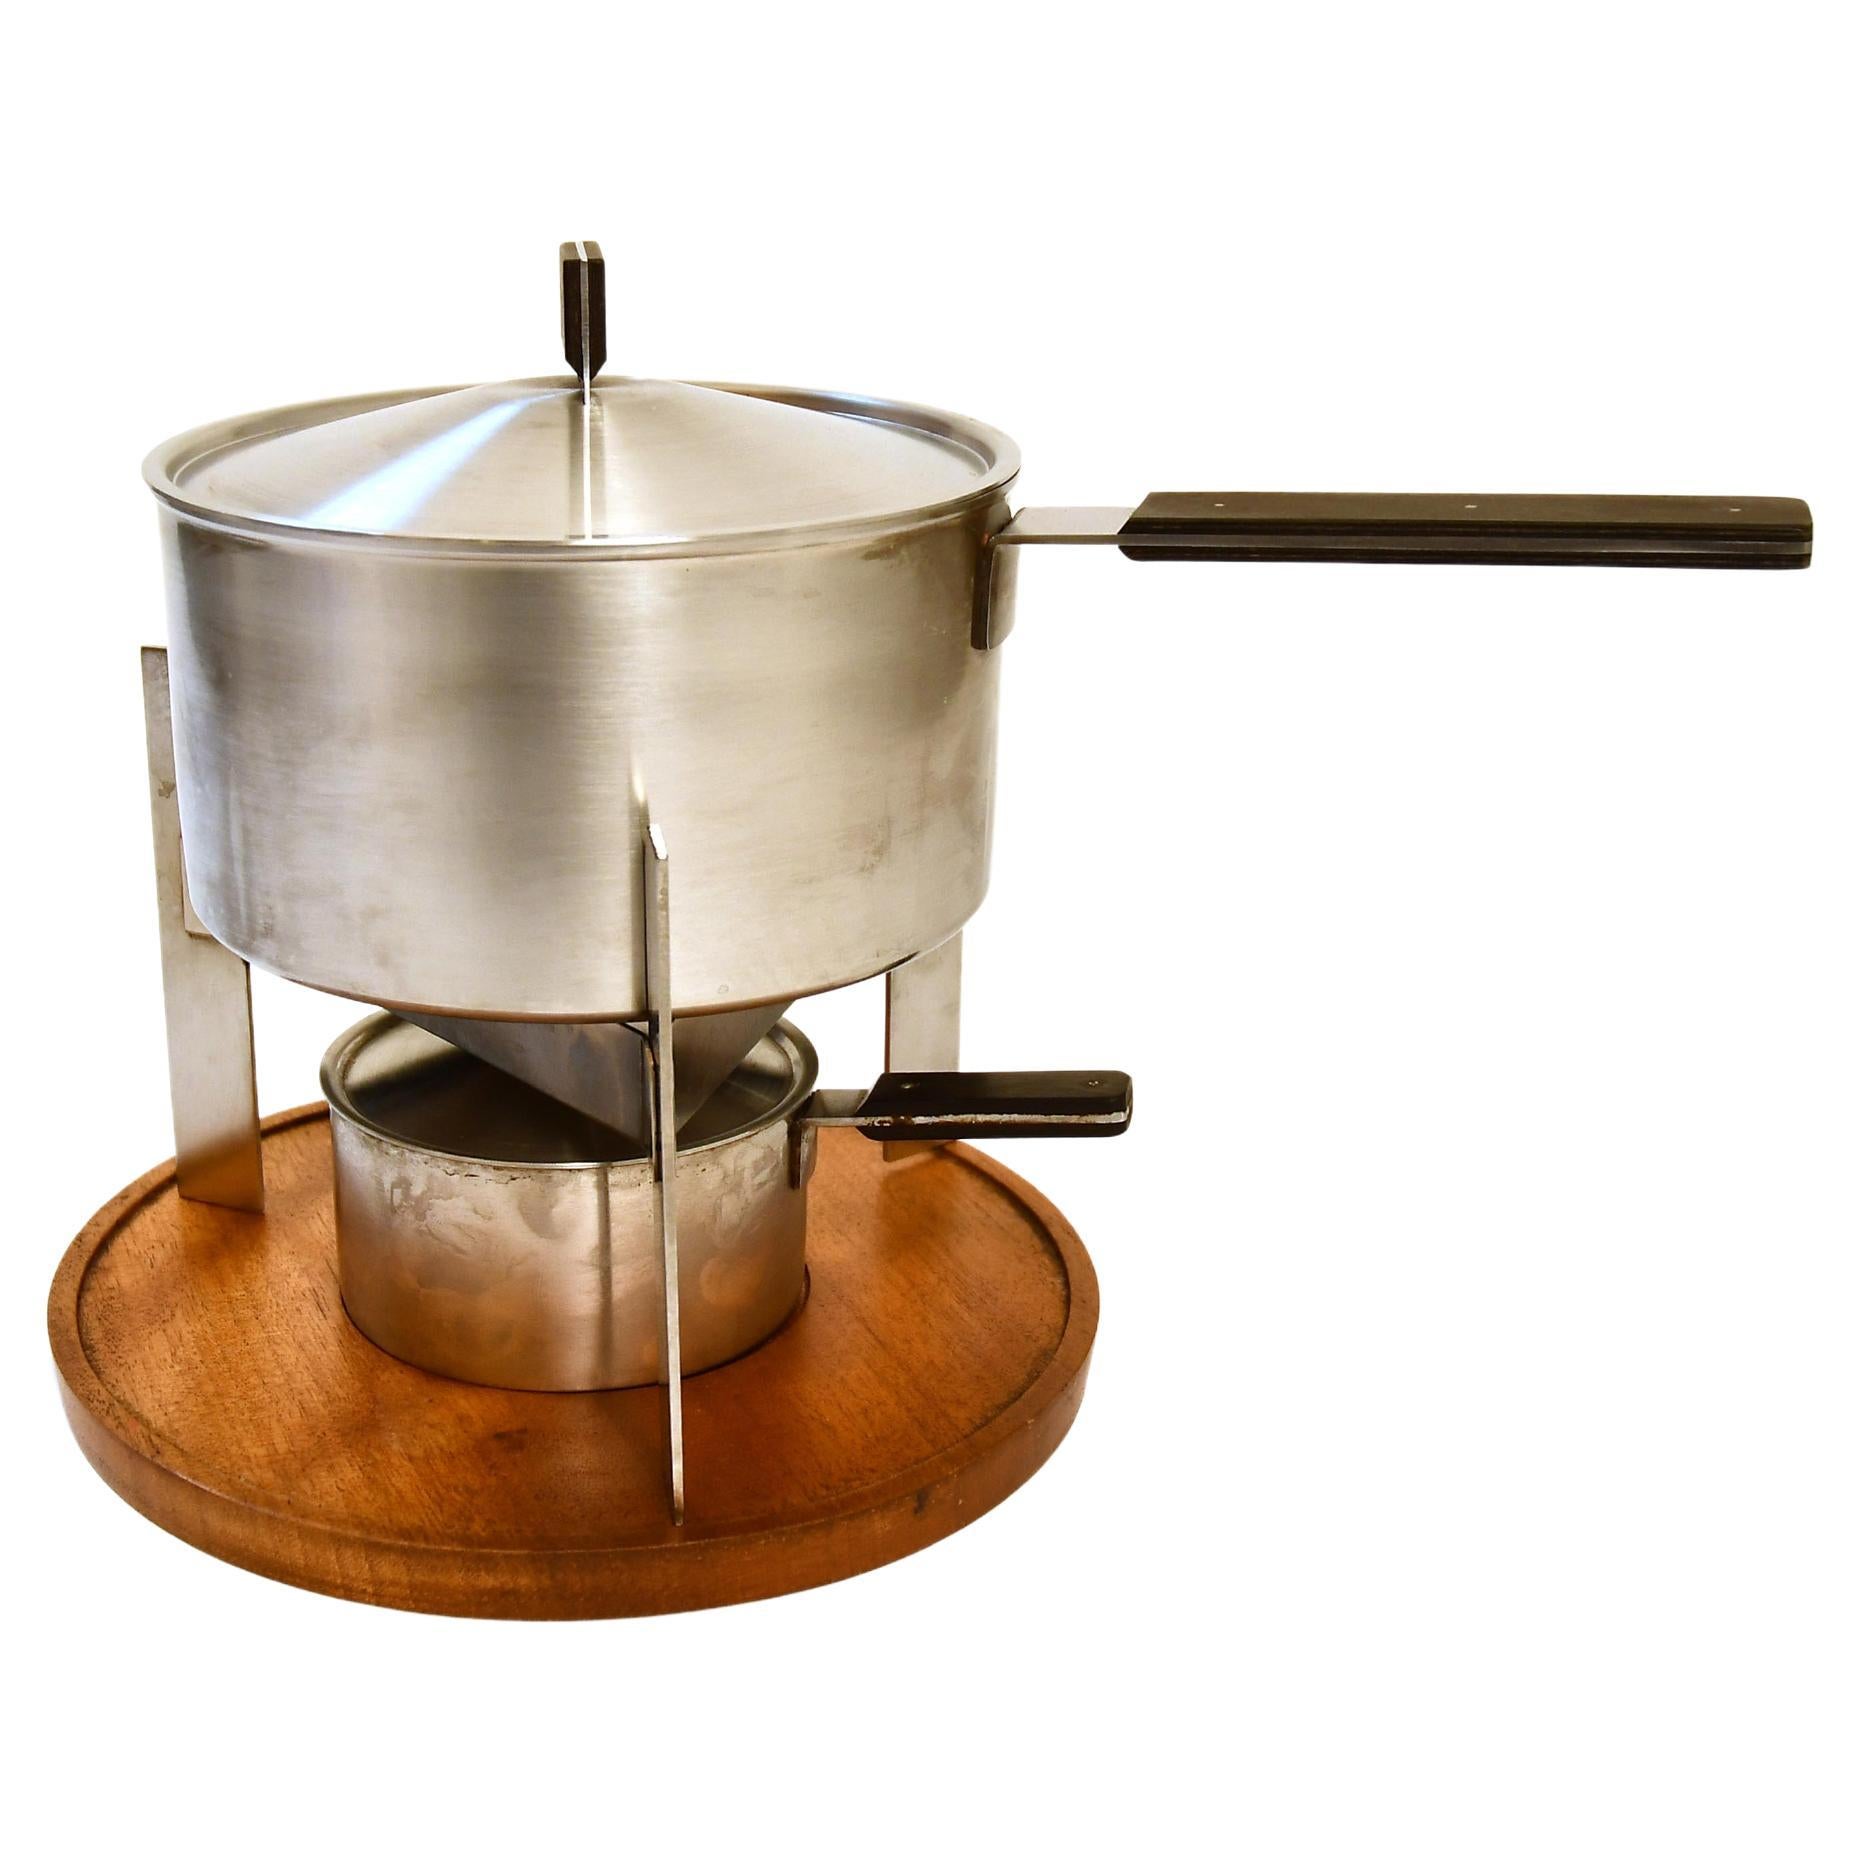 Carl Aubock desigend this Fondue-set in the 1960. Included is the original box made of paper. The contents of the packaging are described on the lid in 4 languages: 
Fondue-Set in six parts: fondue-pot, stainless, 2 pints :: cover for the